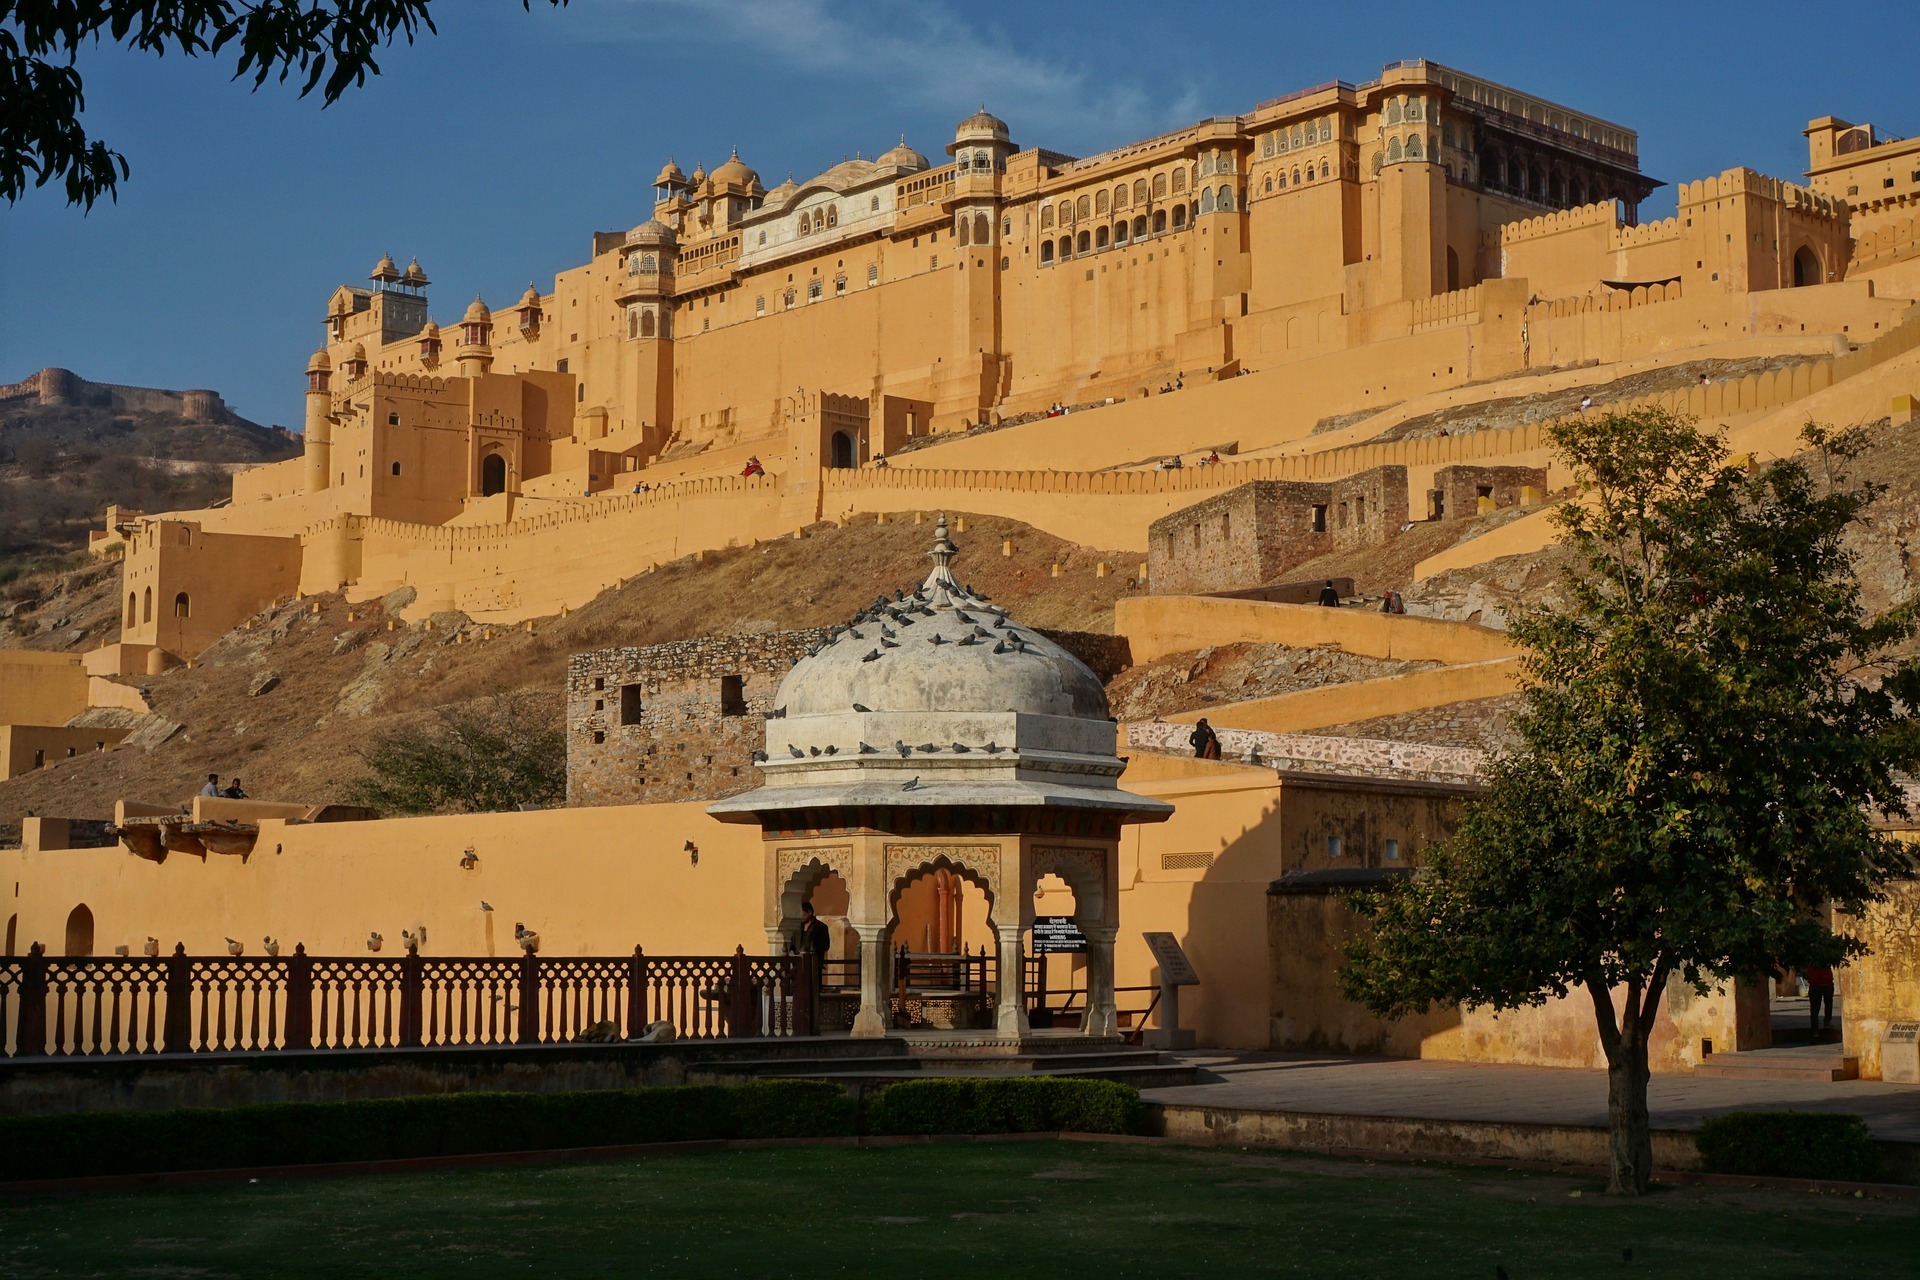 Sand-colored castle on a hill in India